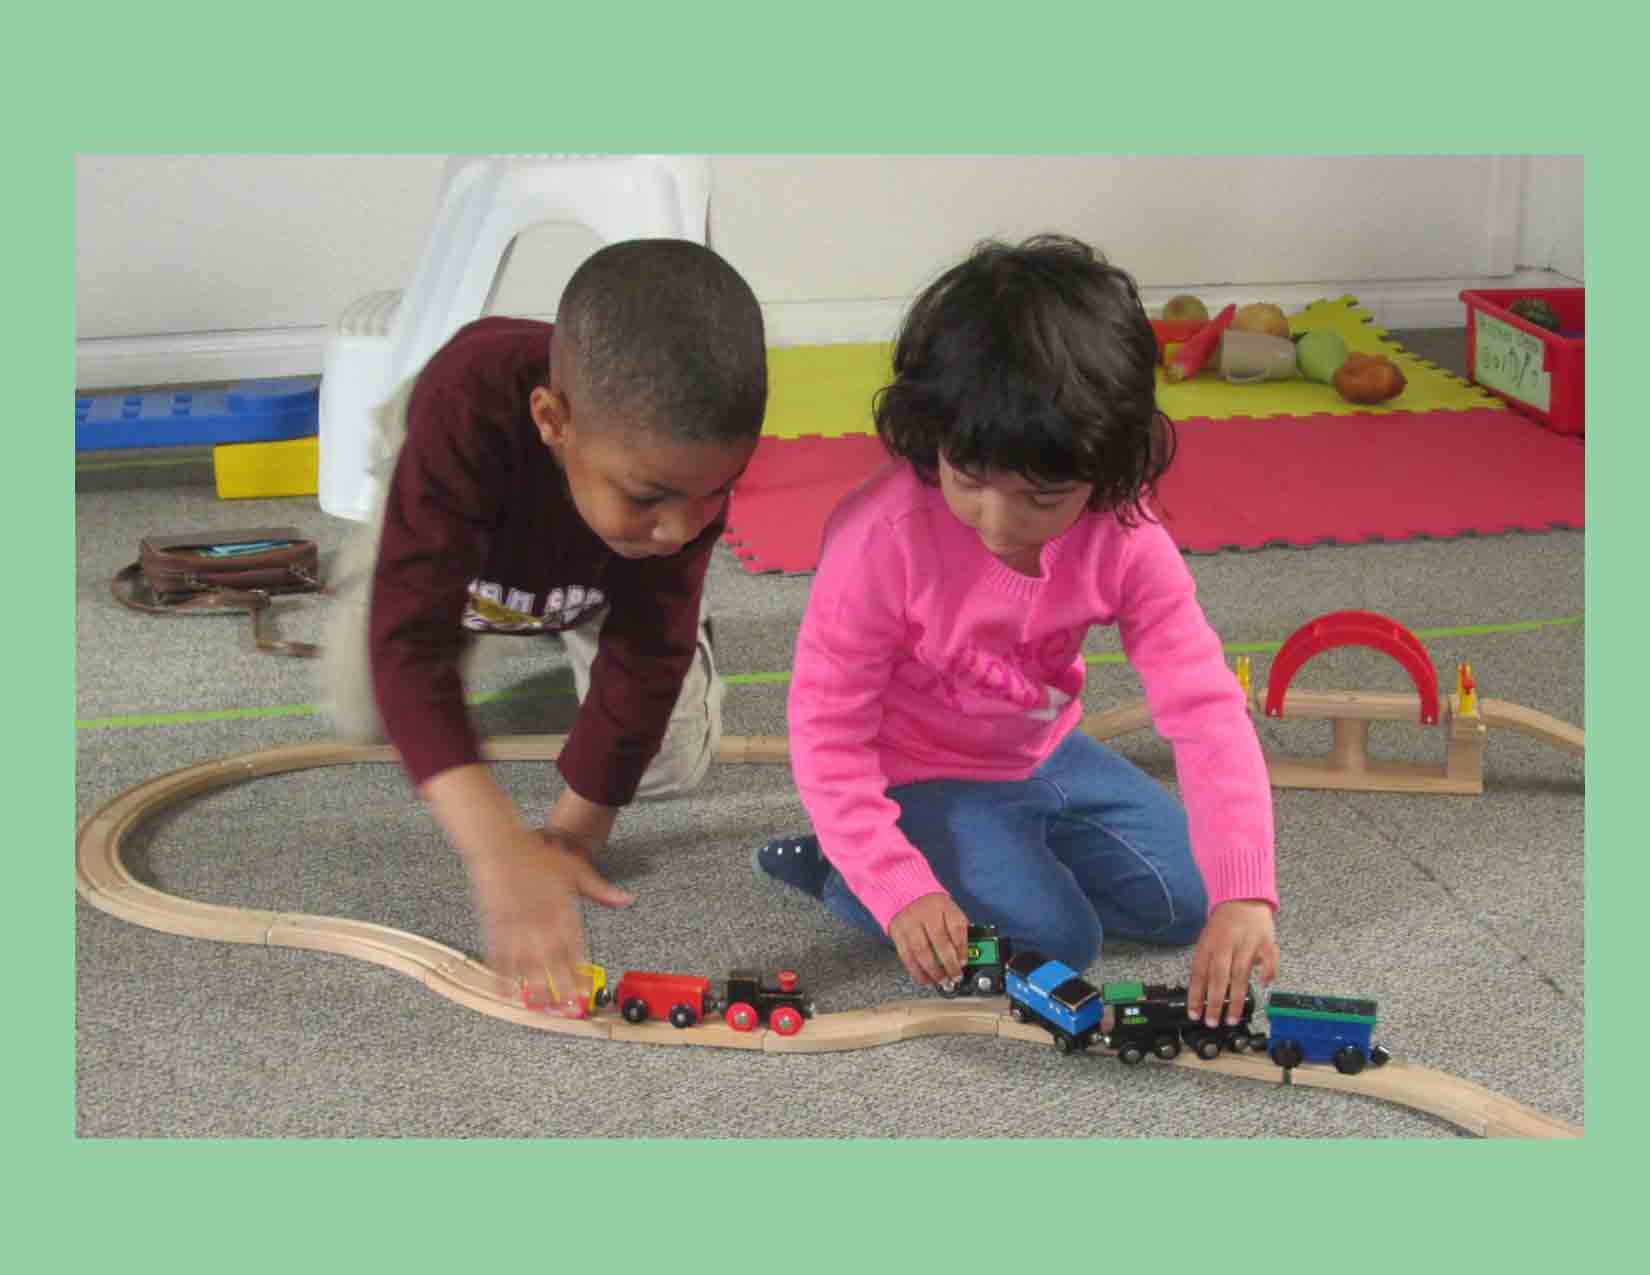 Chestermere-Playing-with-Trains-Preschool